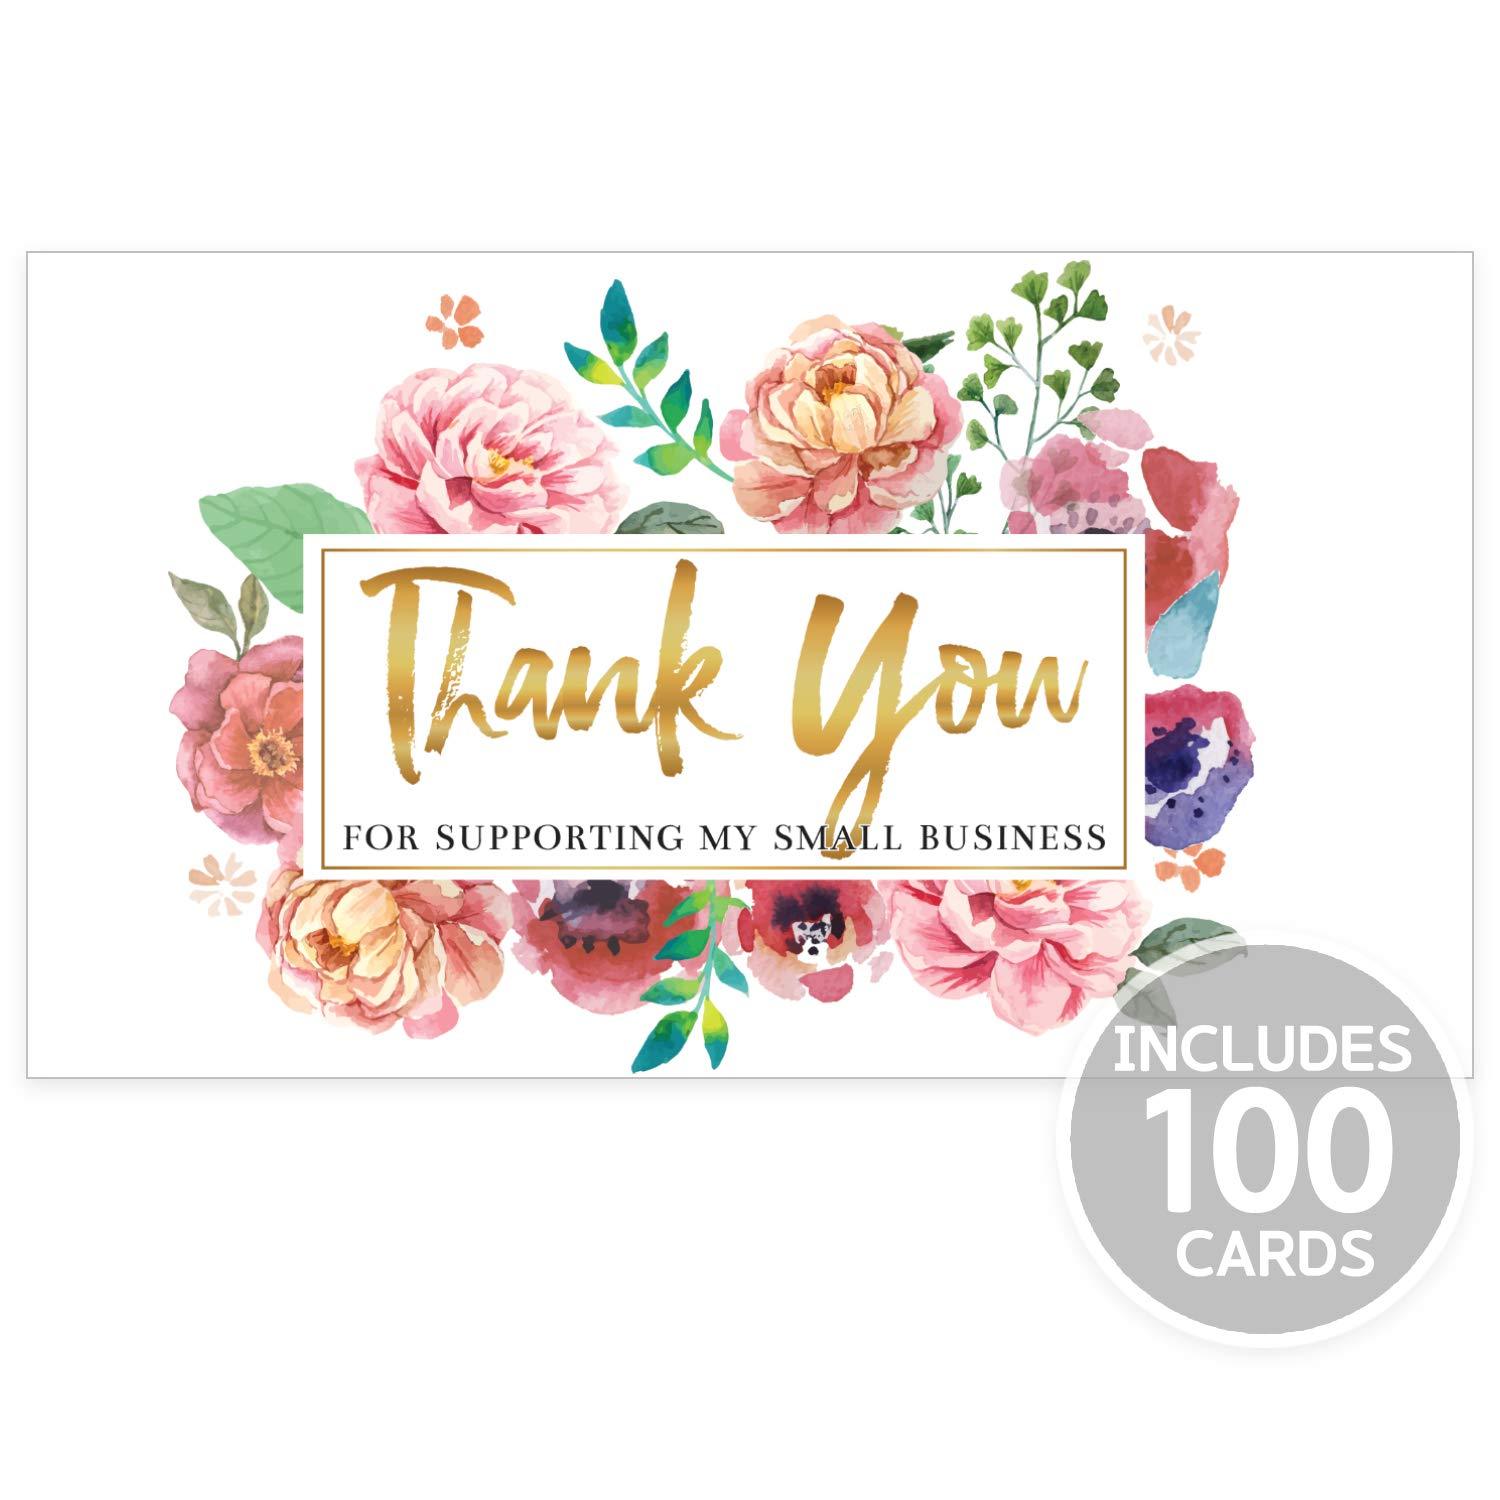 Customer Package Inserts Modern 5th Thank You for Supporting My Small Business Cards for Online Handmade Goods 3.5 x 2 Inches - 100 Business Card Sized Warmest Thanks Design Retail Store